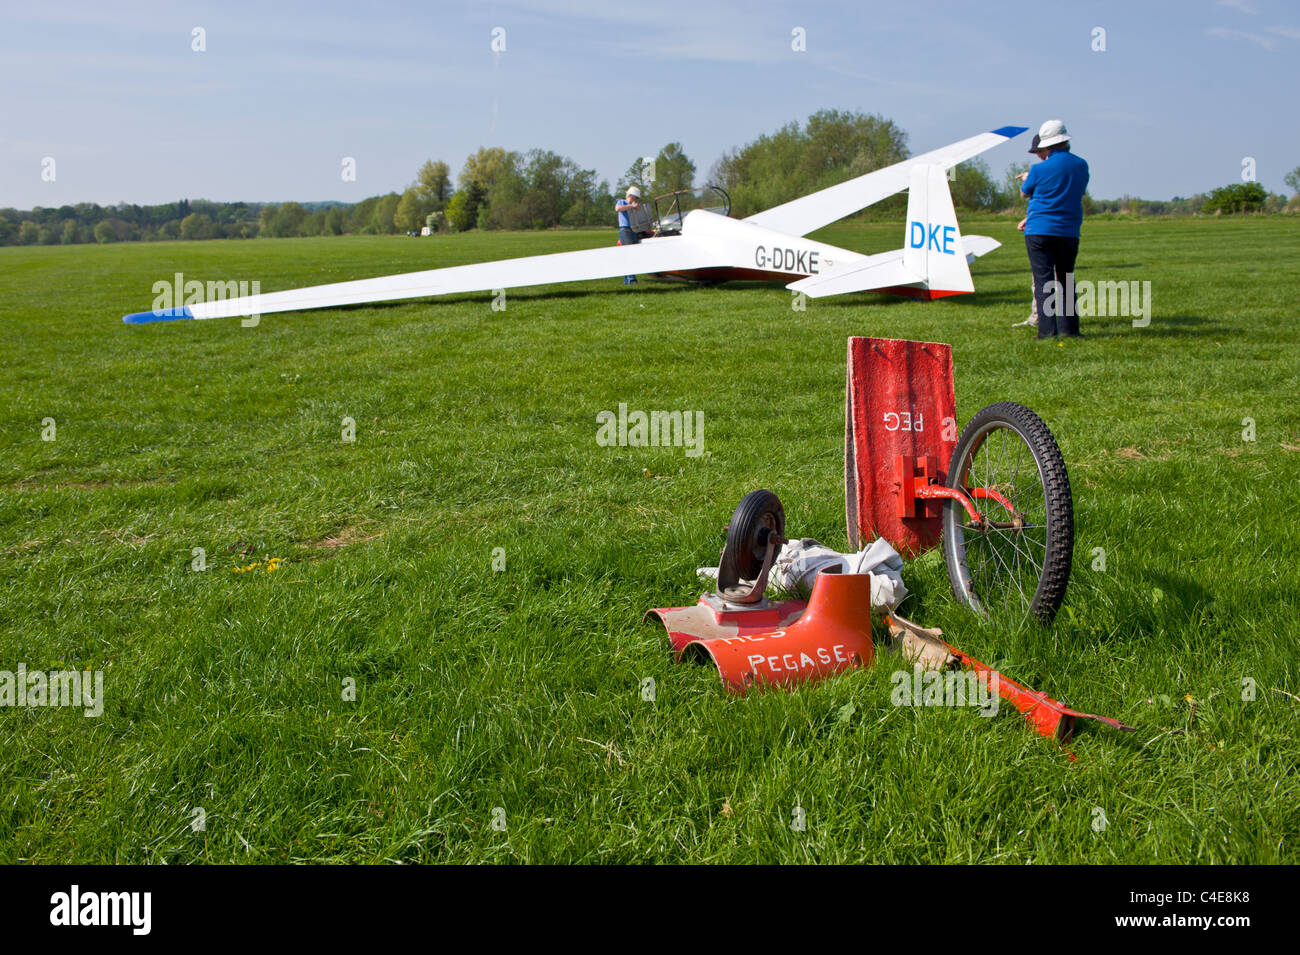 Glider aircraft being prepared for flight on airfield Stock Photo